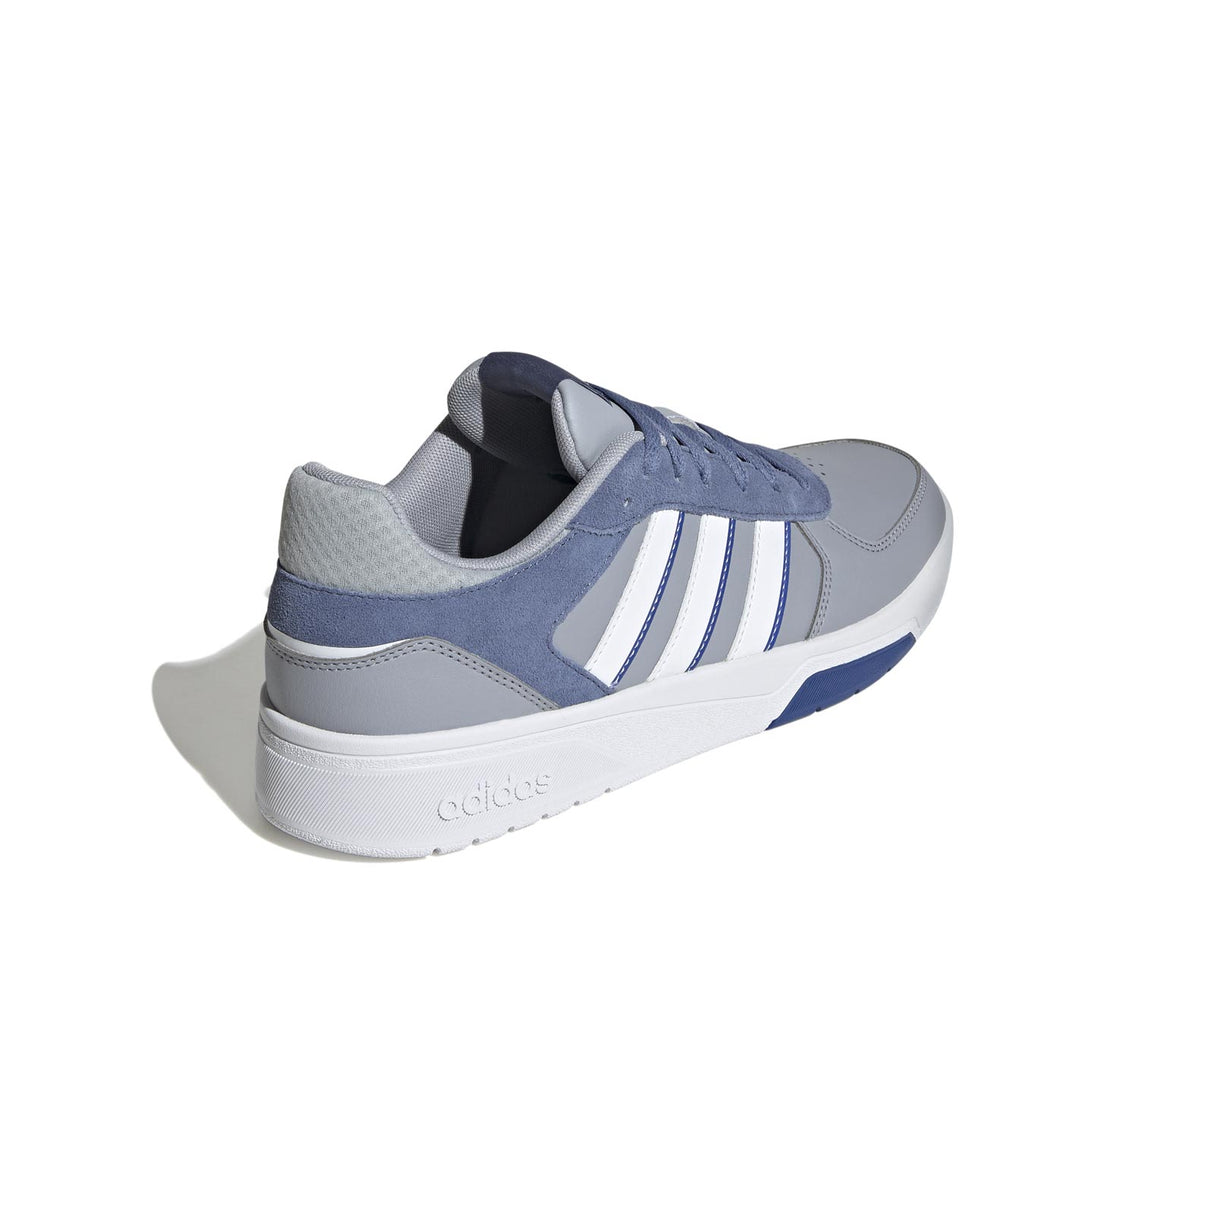 adidas CourtBeat Mens Shoes